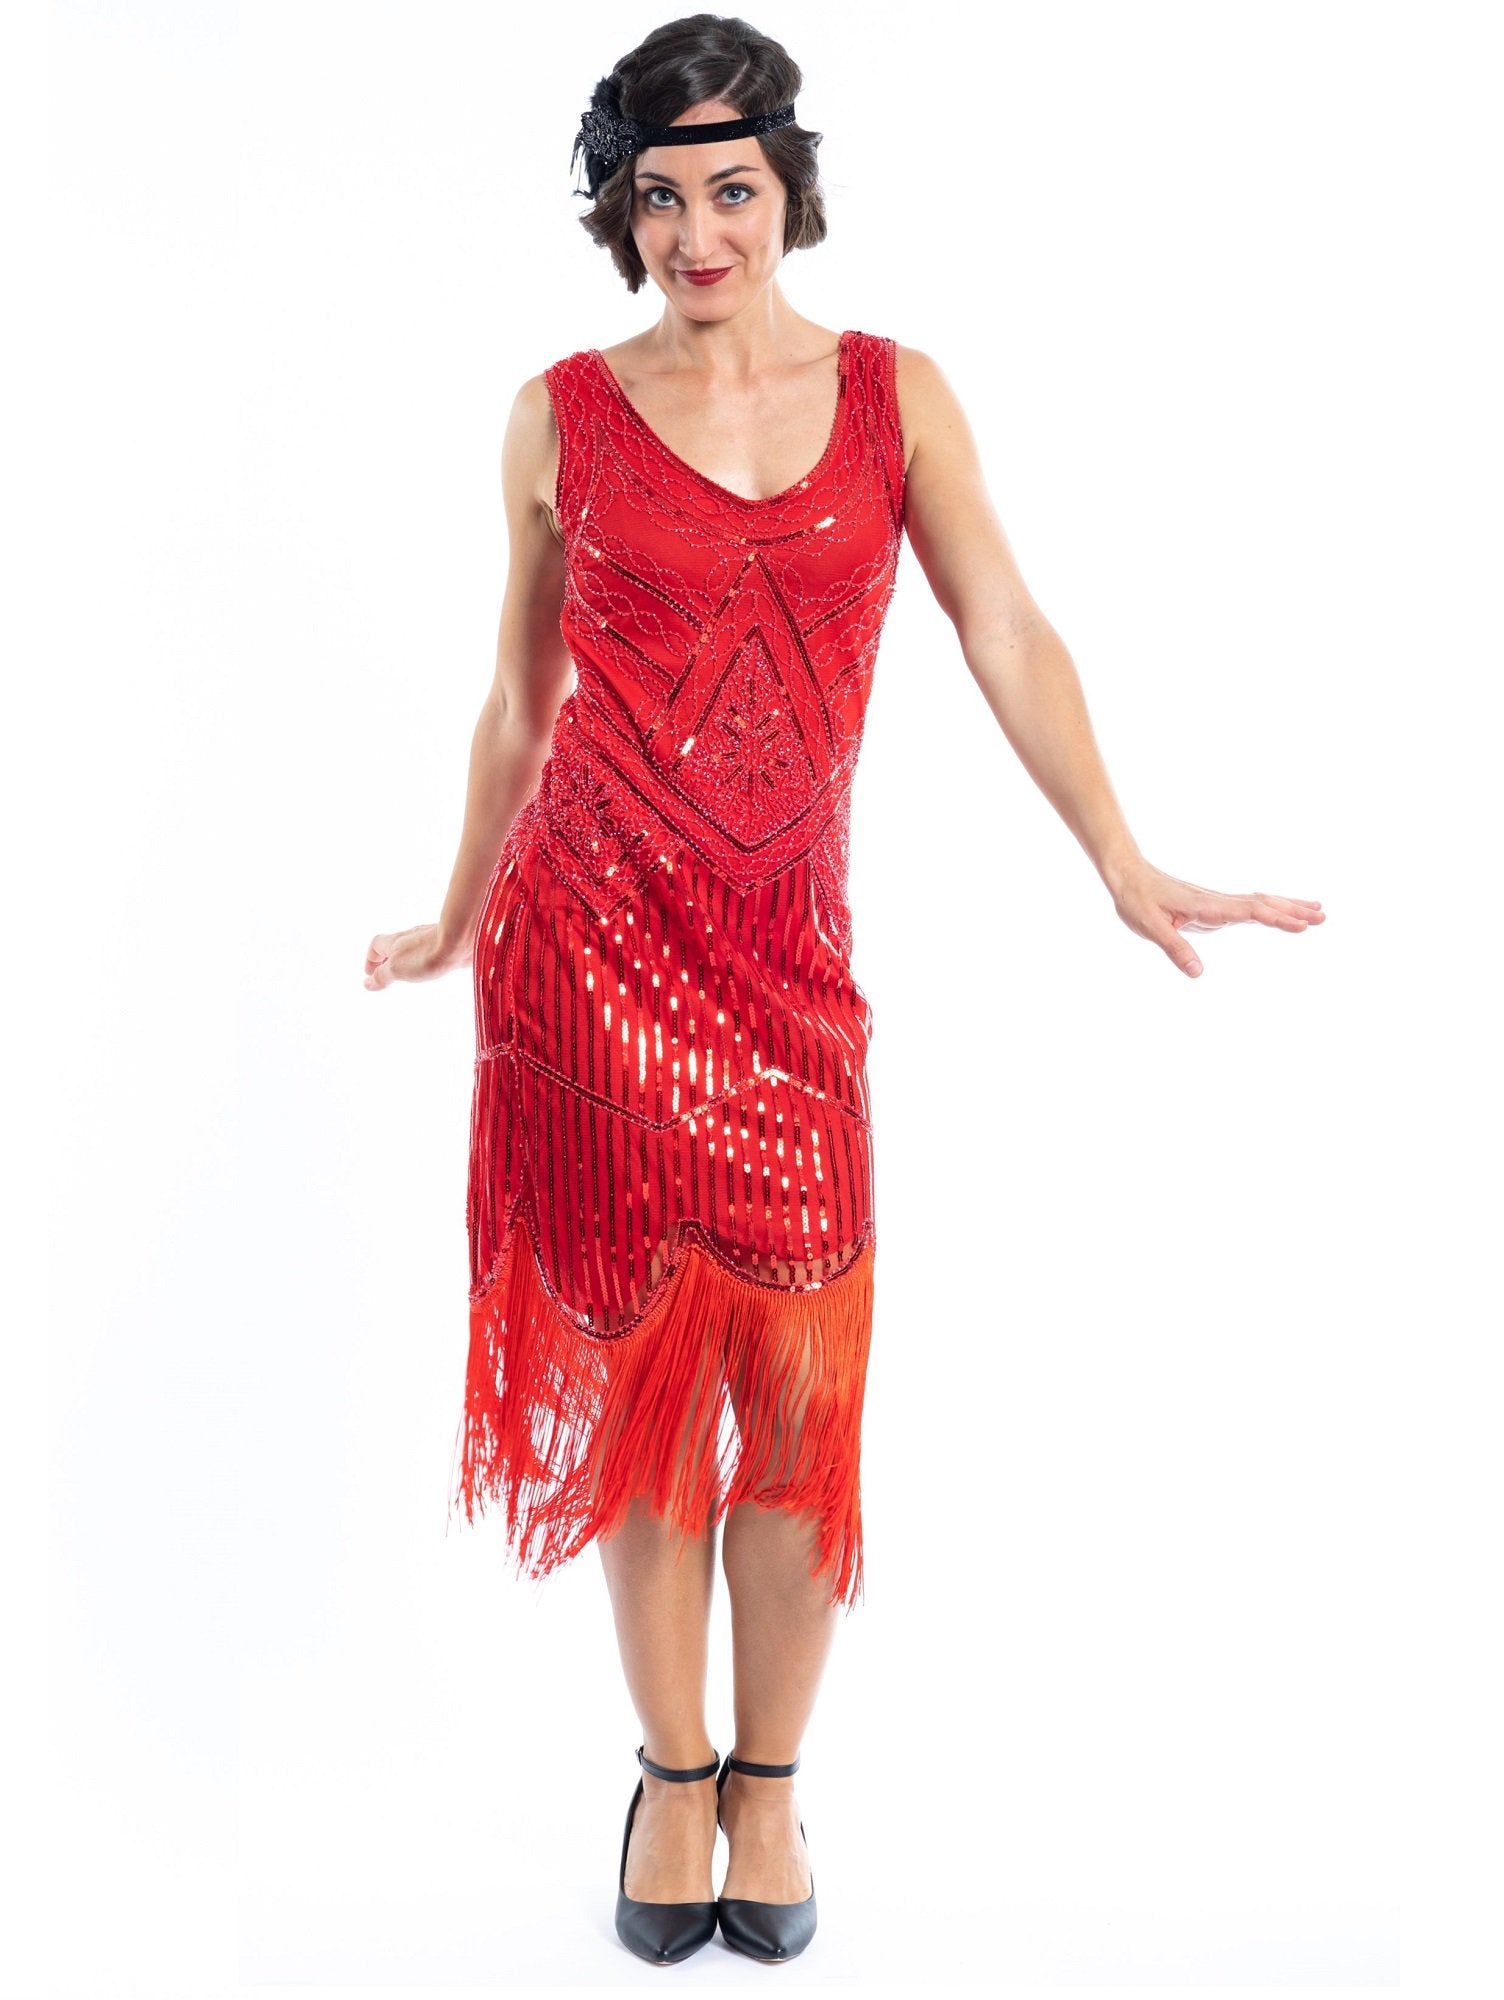 A 1920s Red Flapper Dress with sequins and beads